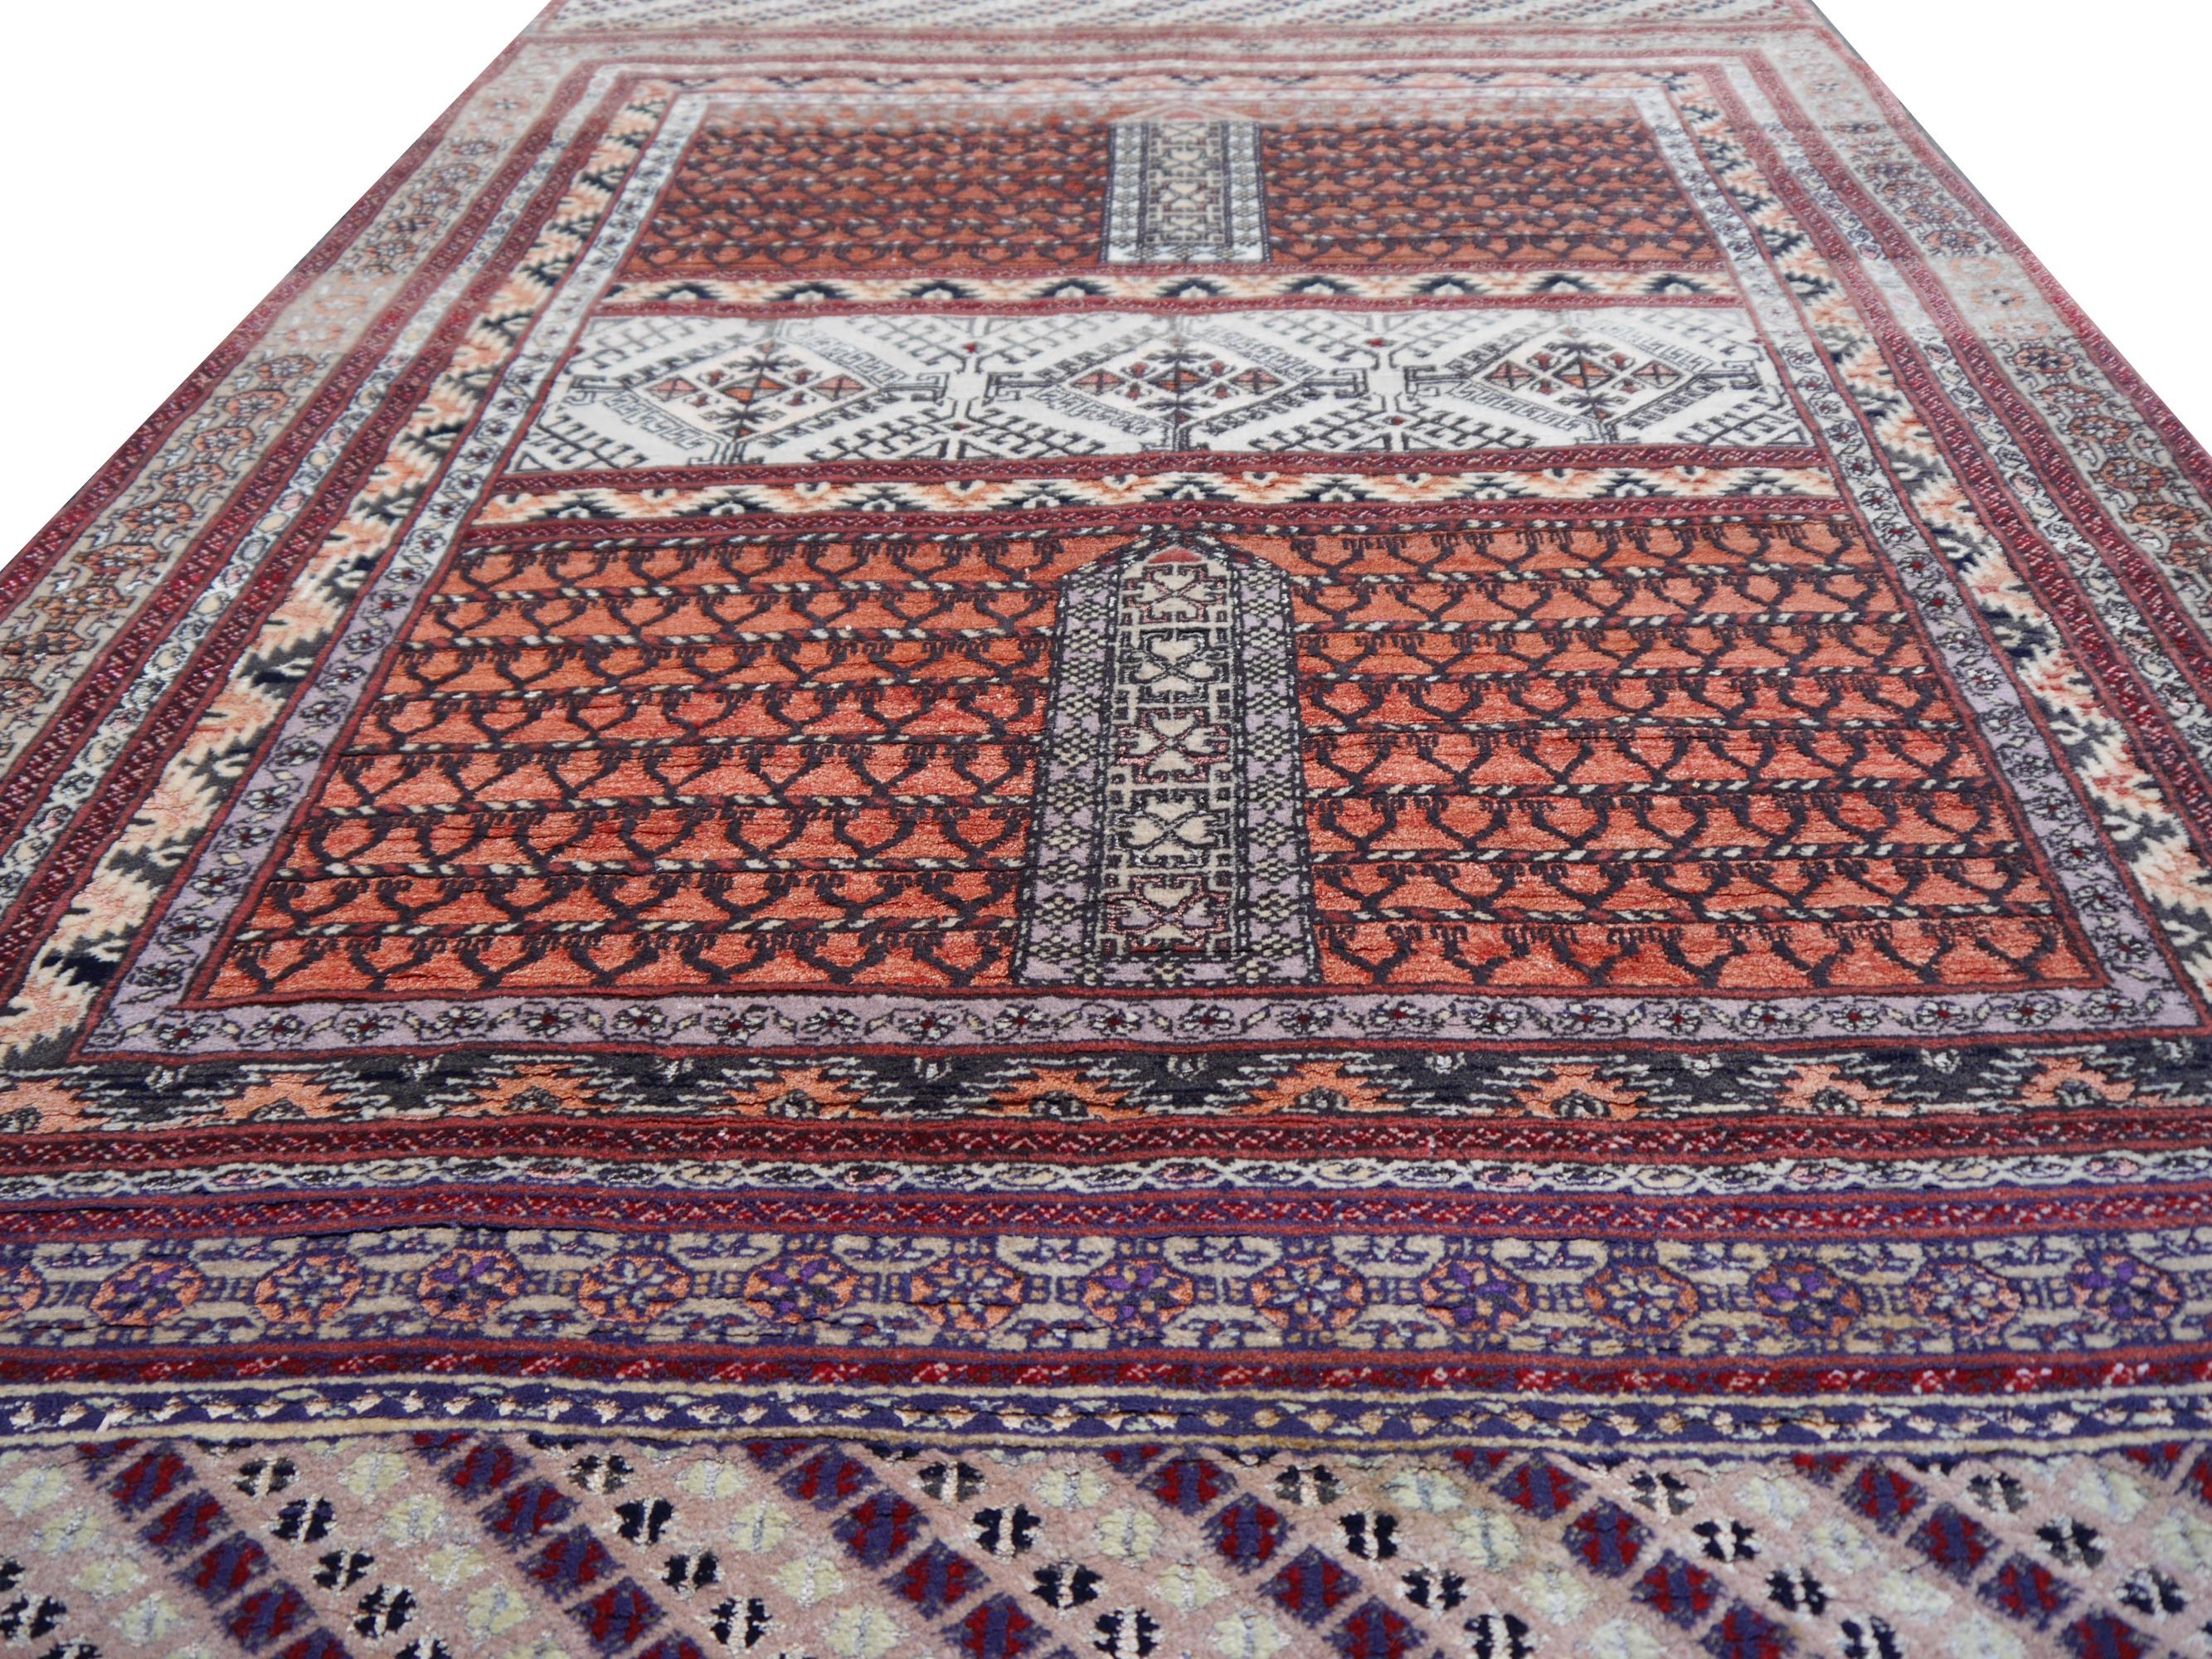 20th Century Part Silk Rug Hatchlou Engsi Tribal Vintage Carpet from Afghan Turkoman Tribe